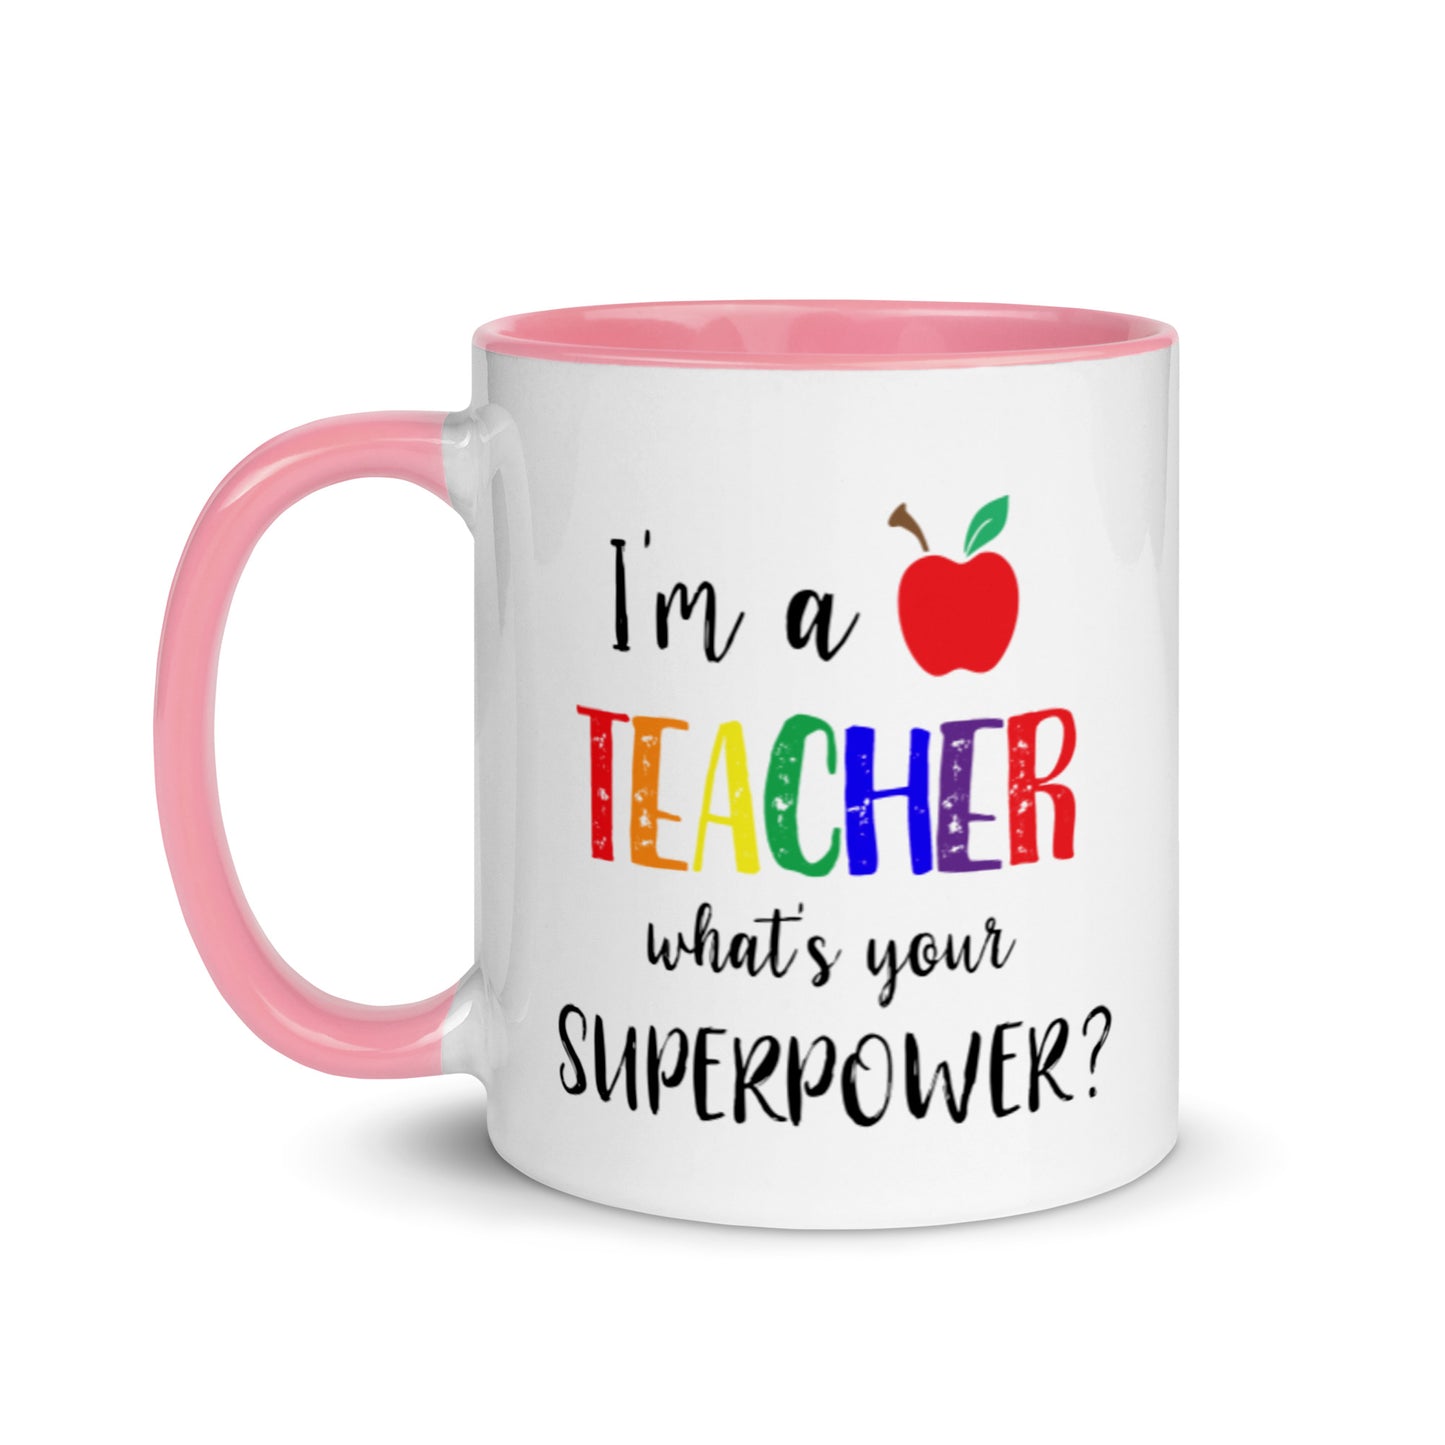 I'm a teacher what's your superpower mug with pink interior